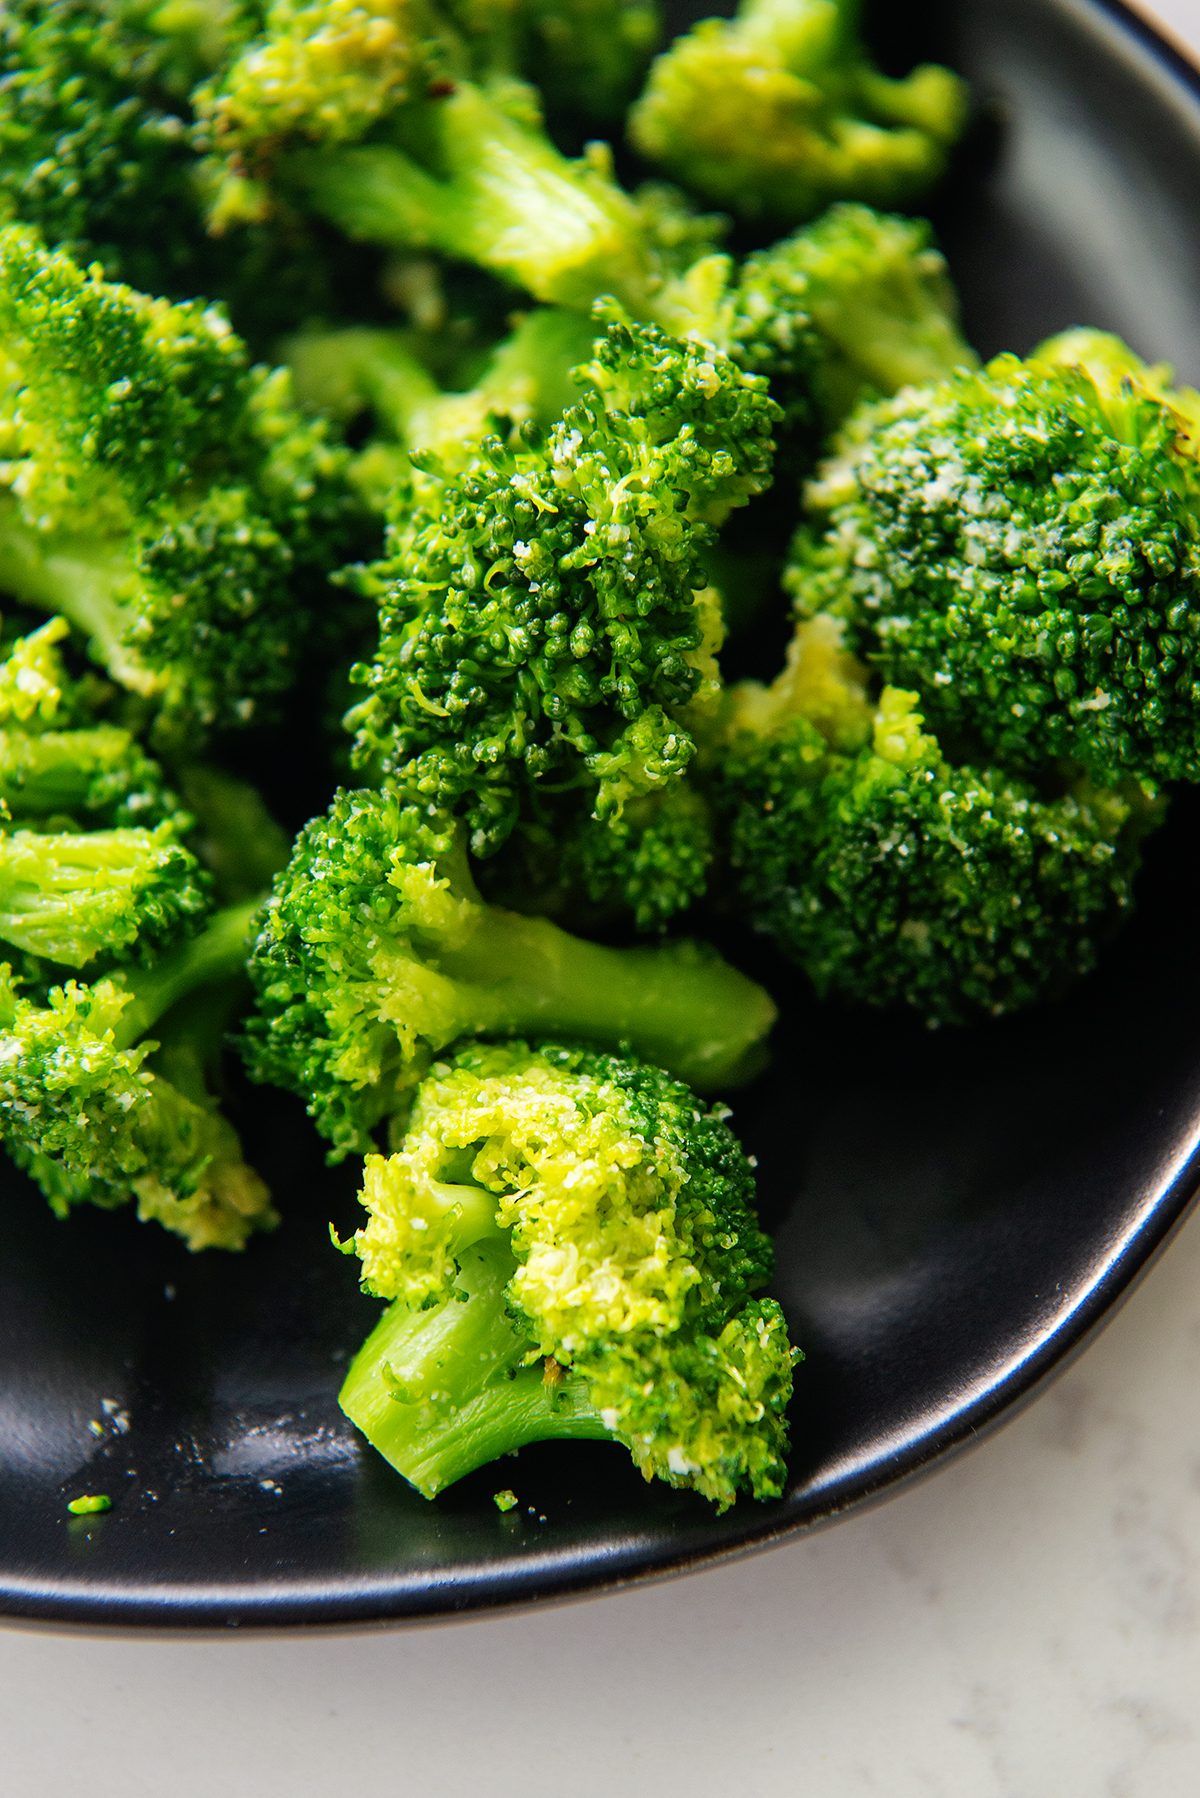 Close up of broccoli florets on a small black plate.